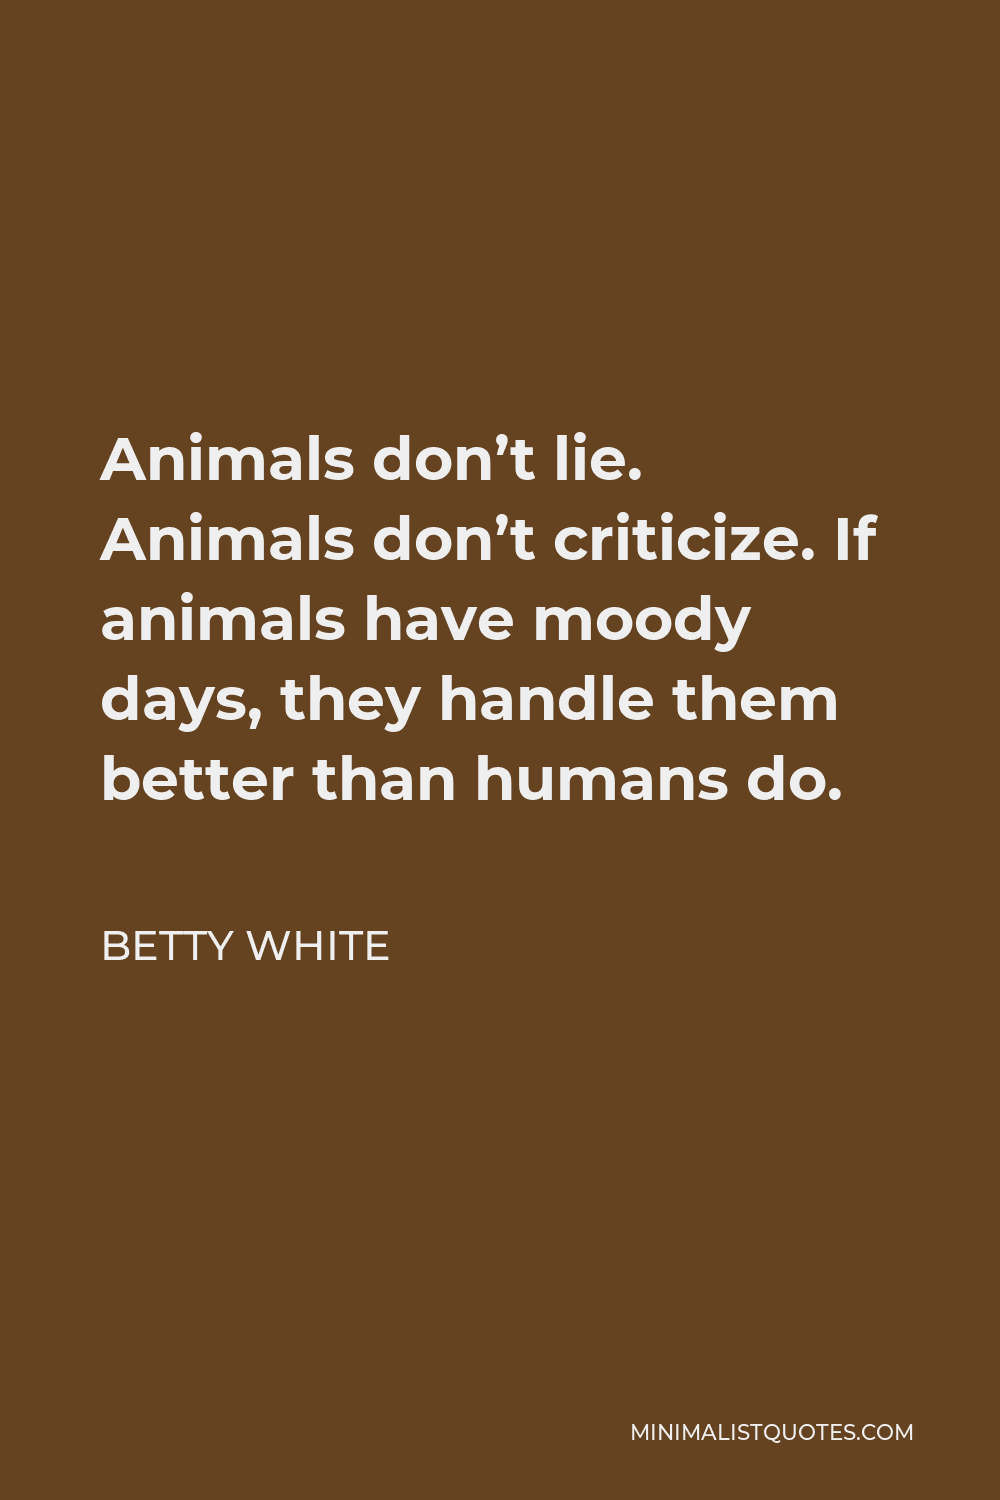 Betty White Quote: Animals don't lie. Animals don't criticize. If animals  have moody days, they handle them better than humans do.